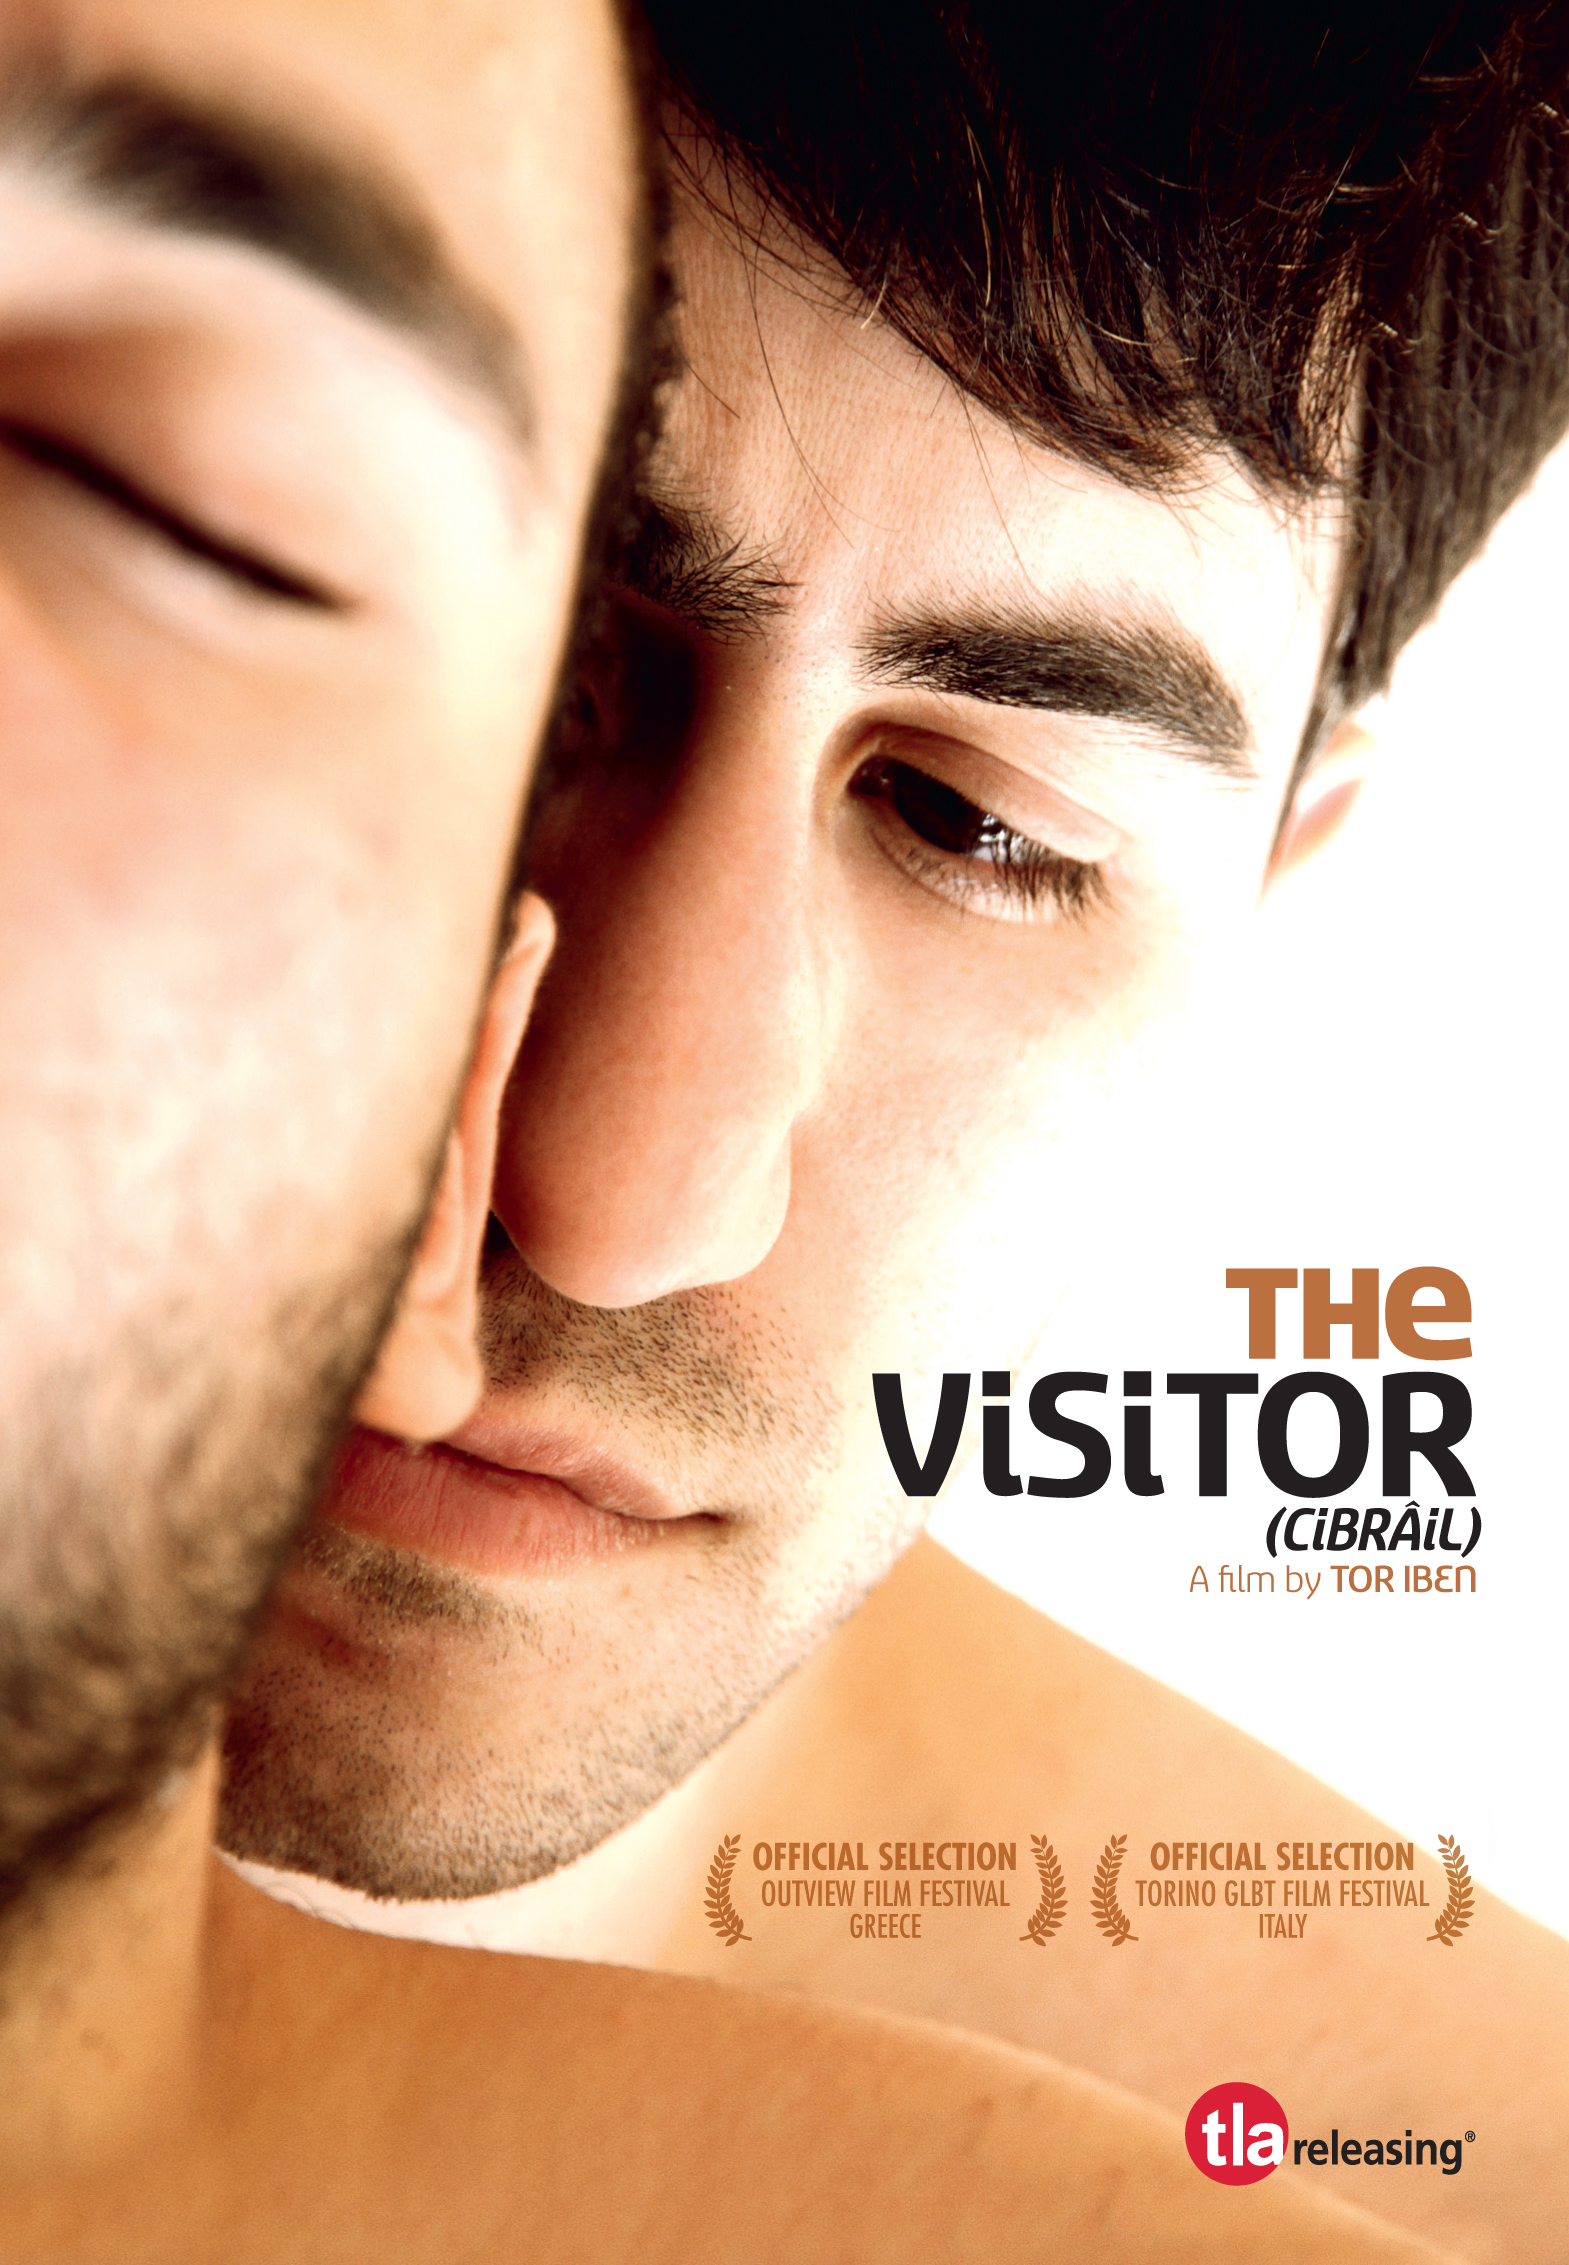 The Visitor (2011) Cibrail with English Subtitles 2